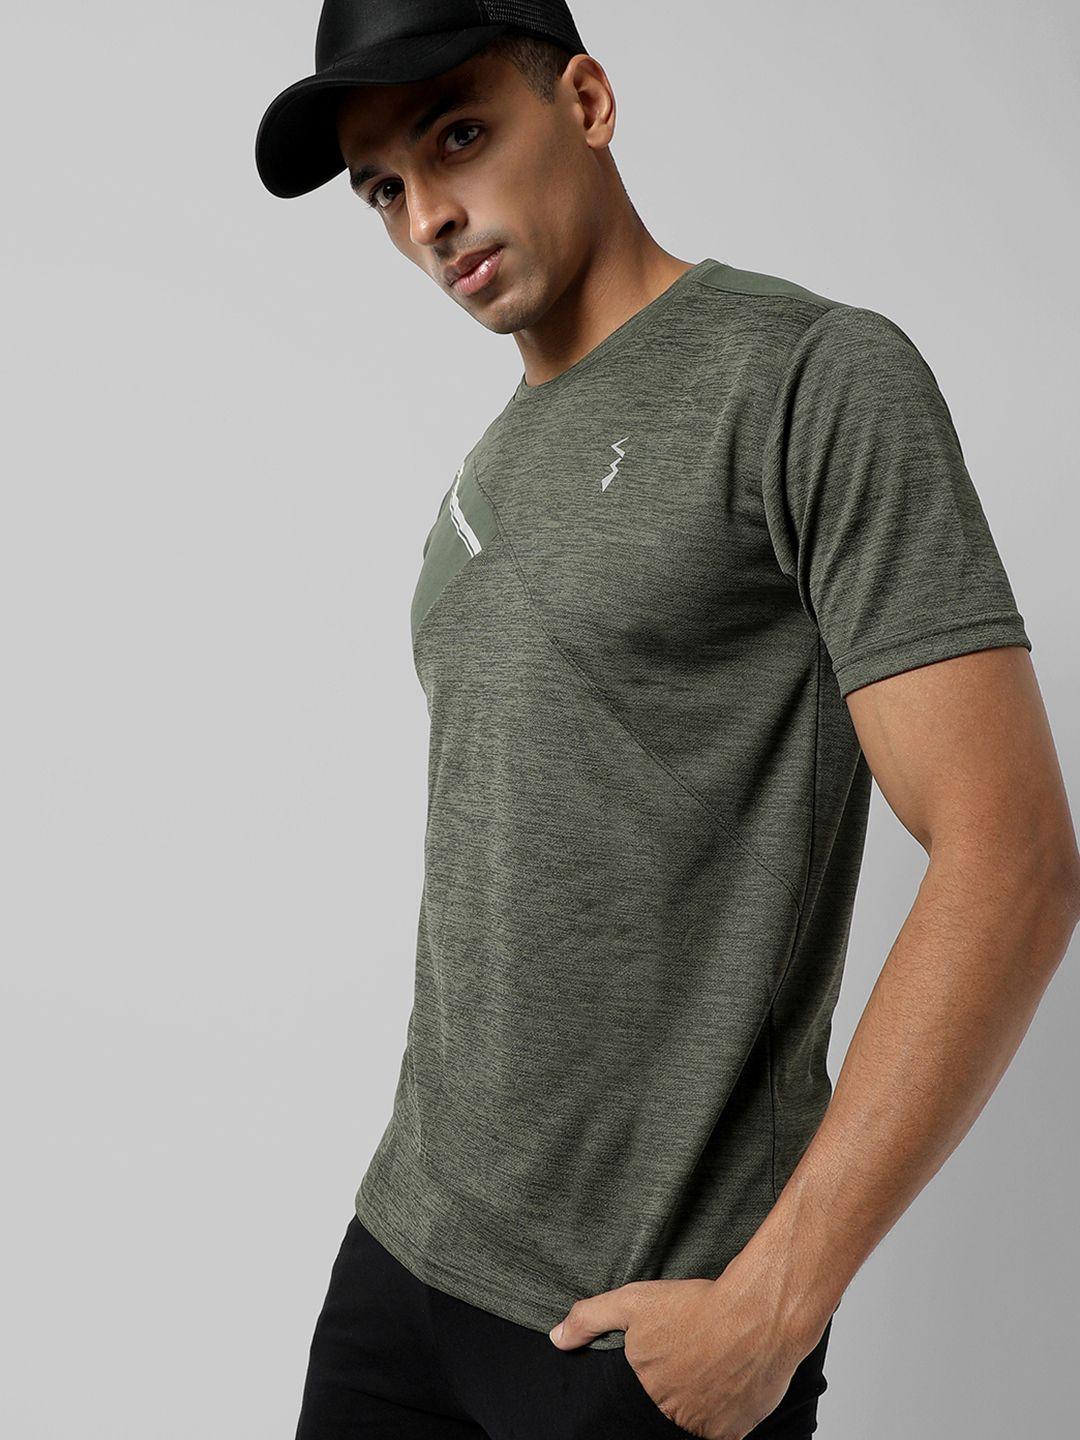 campus-sutra-men-olive-green-outdoor-t-shirt